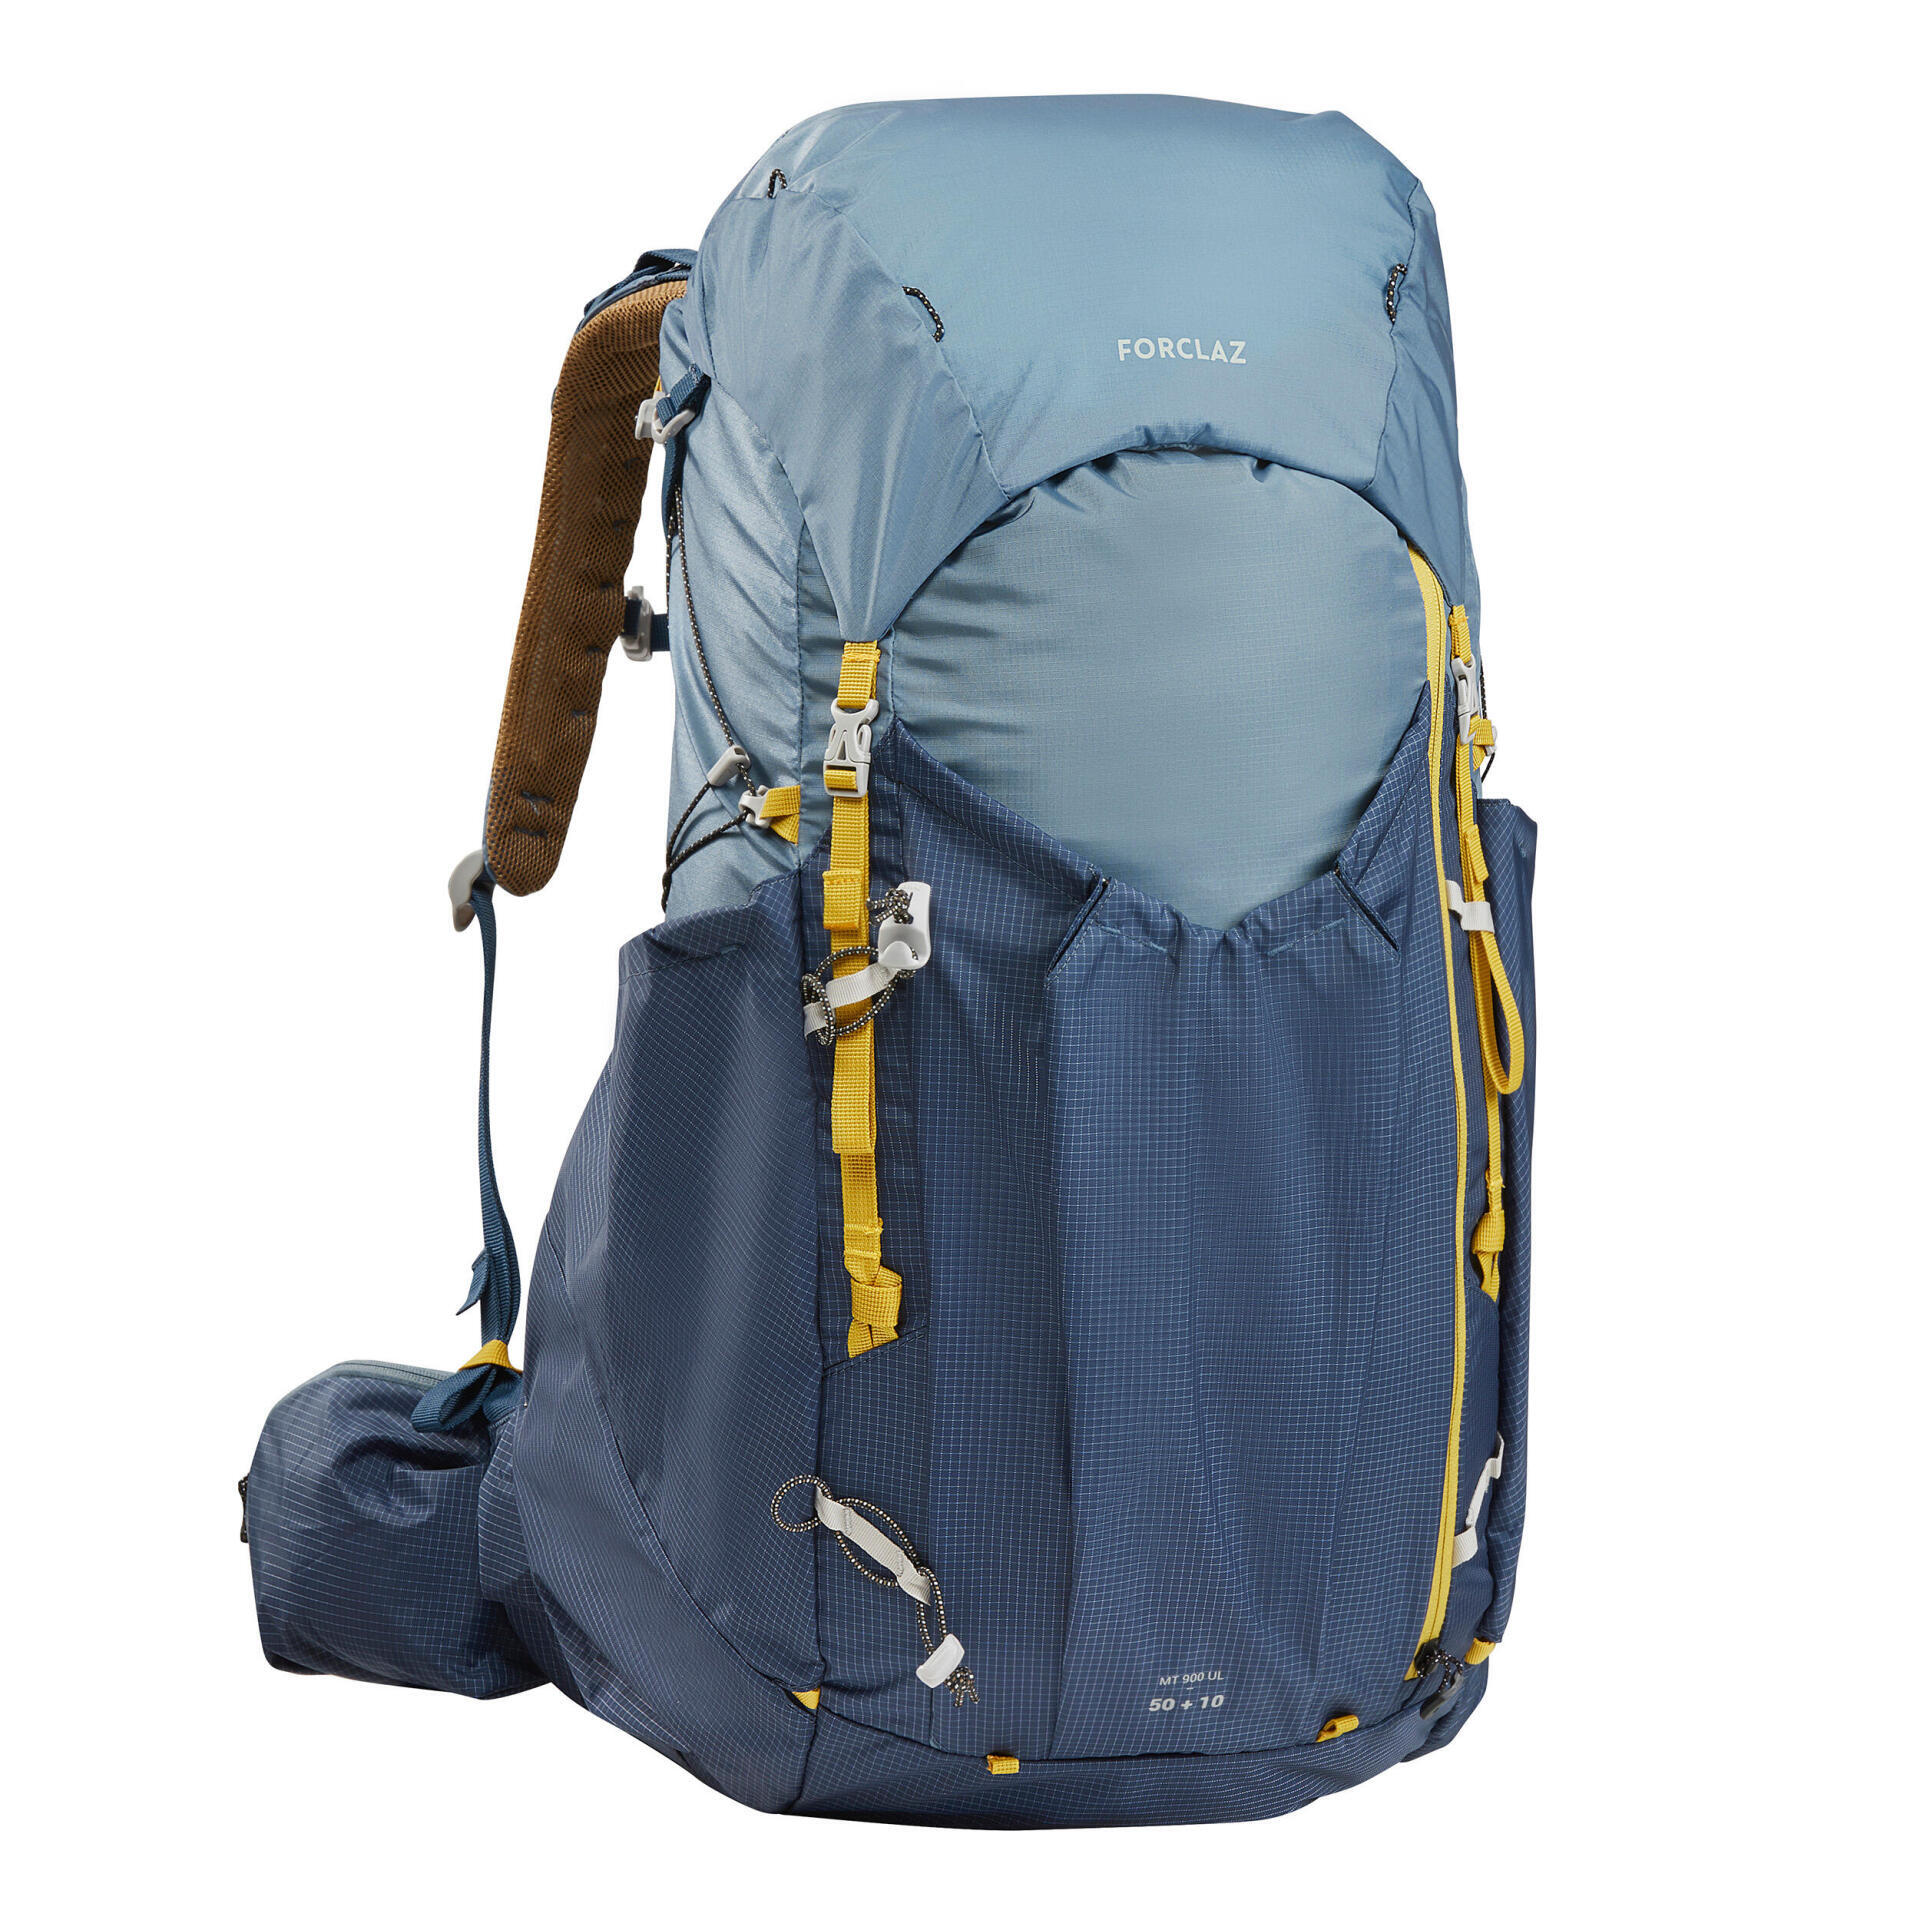 Lightweight and spacious: Which bag for a 3-day trek?